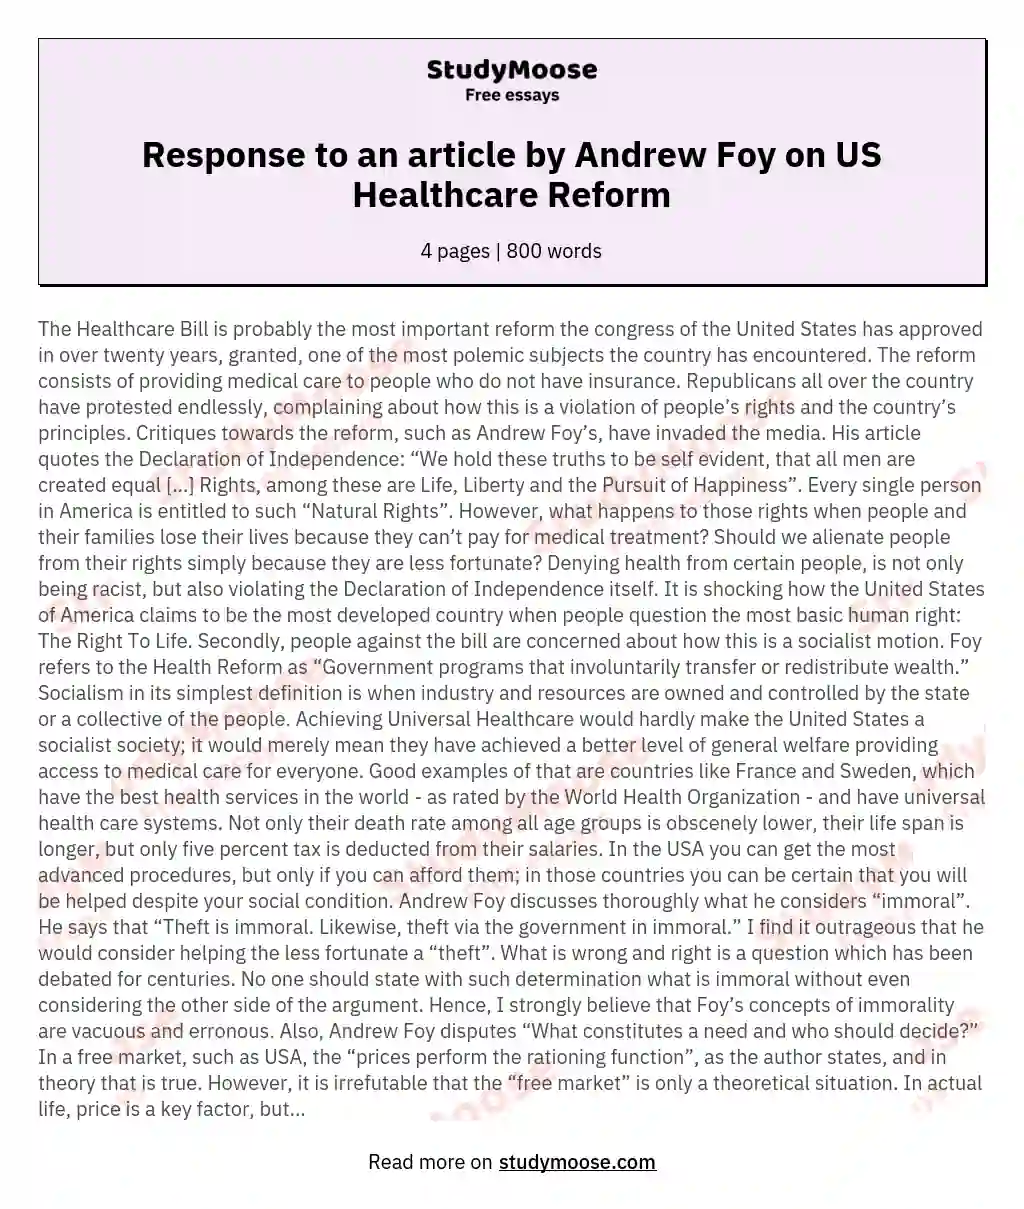 Response to an article by Andrew Foy on US Healthcare Reform essay